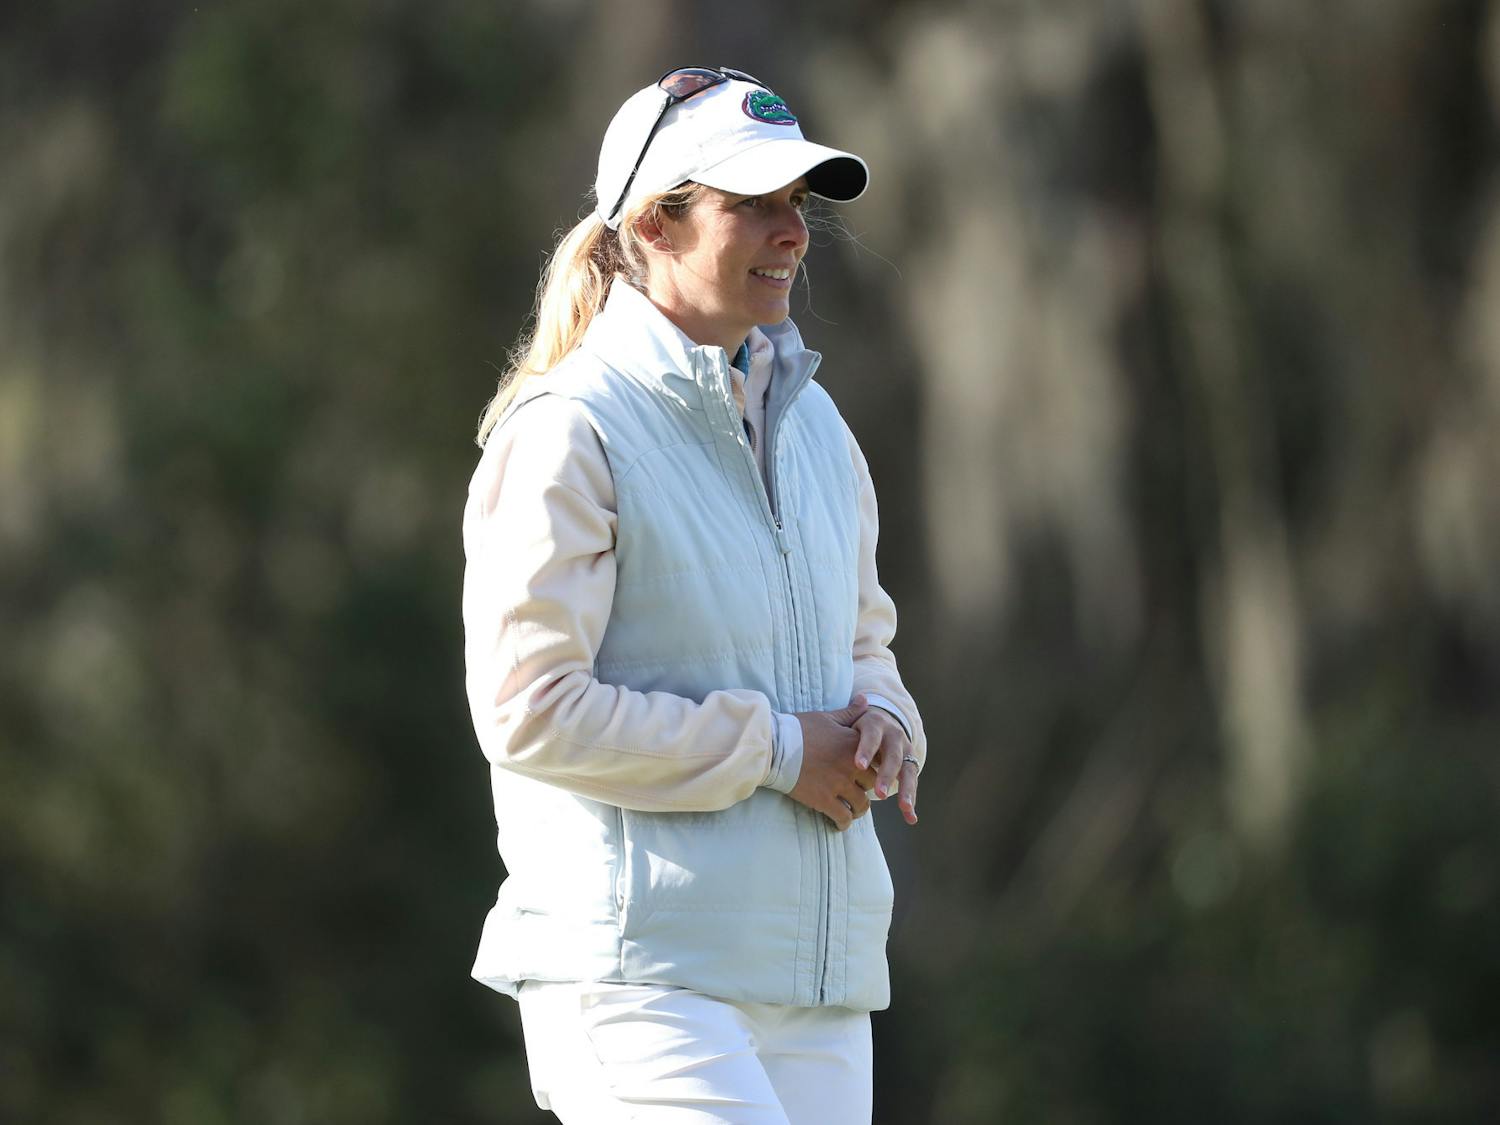 Florida Gators women's golf coach Emily Glaser on Monday, February 22, 2021 at the Mark Bostick Golf Course in Gainesville, FL. Photo courtesy of the UAA.